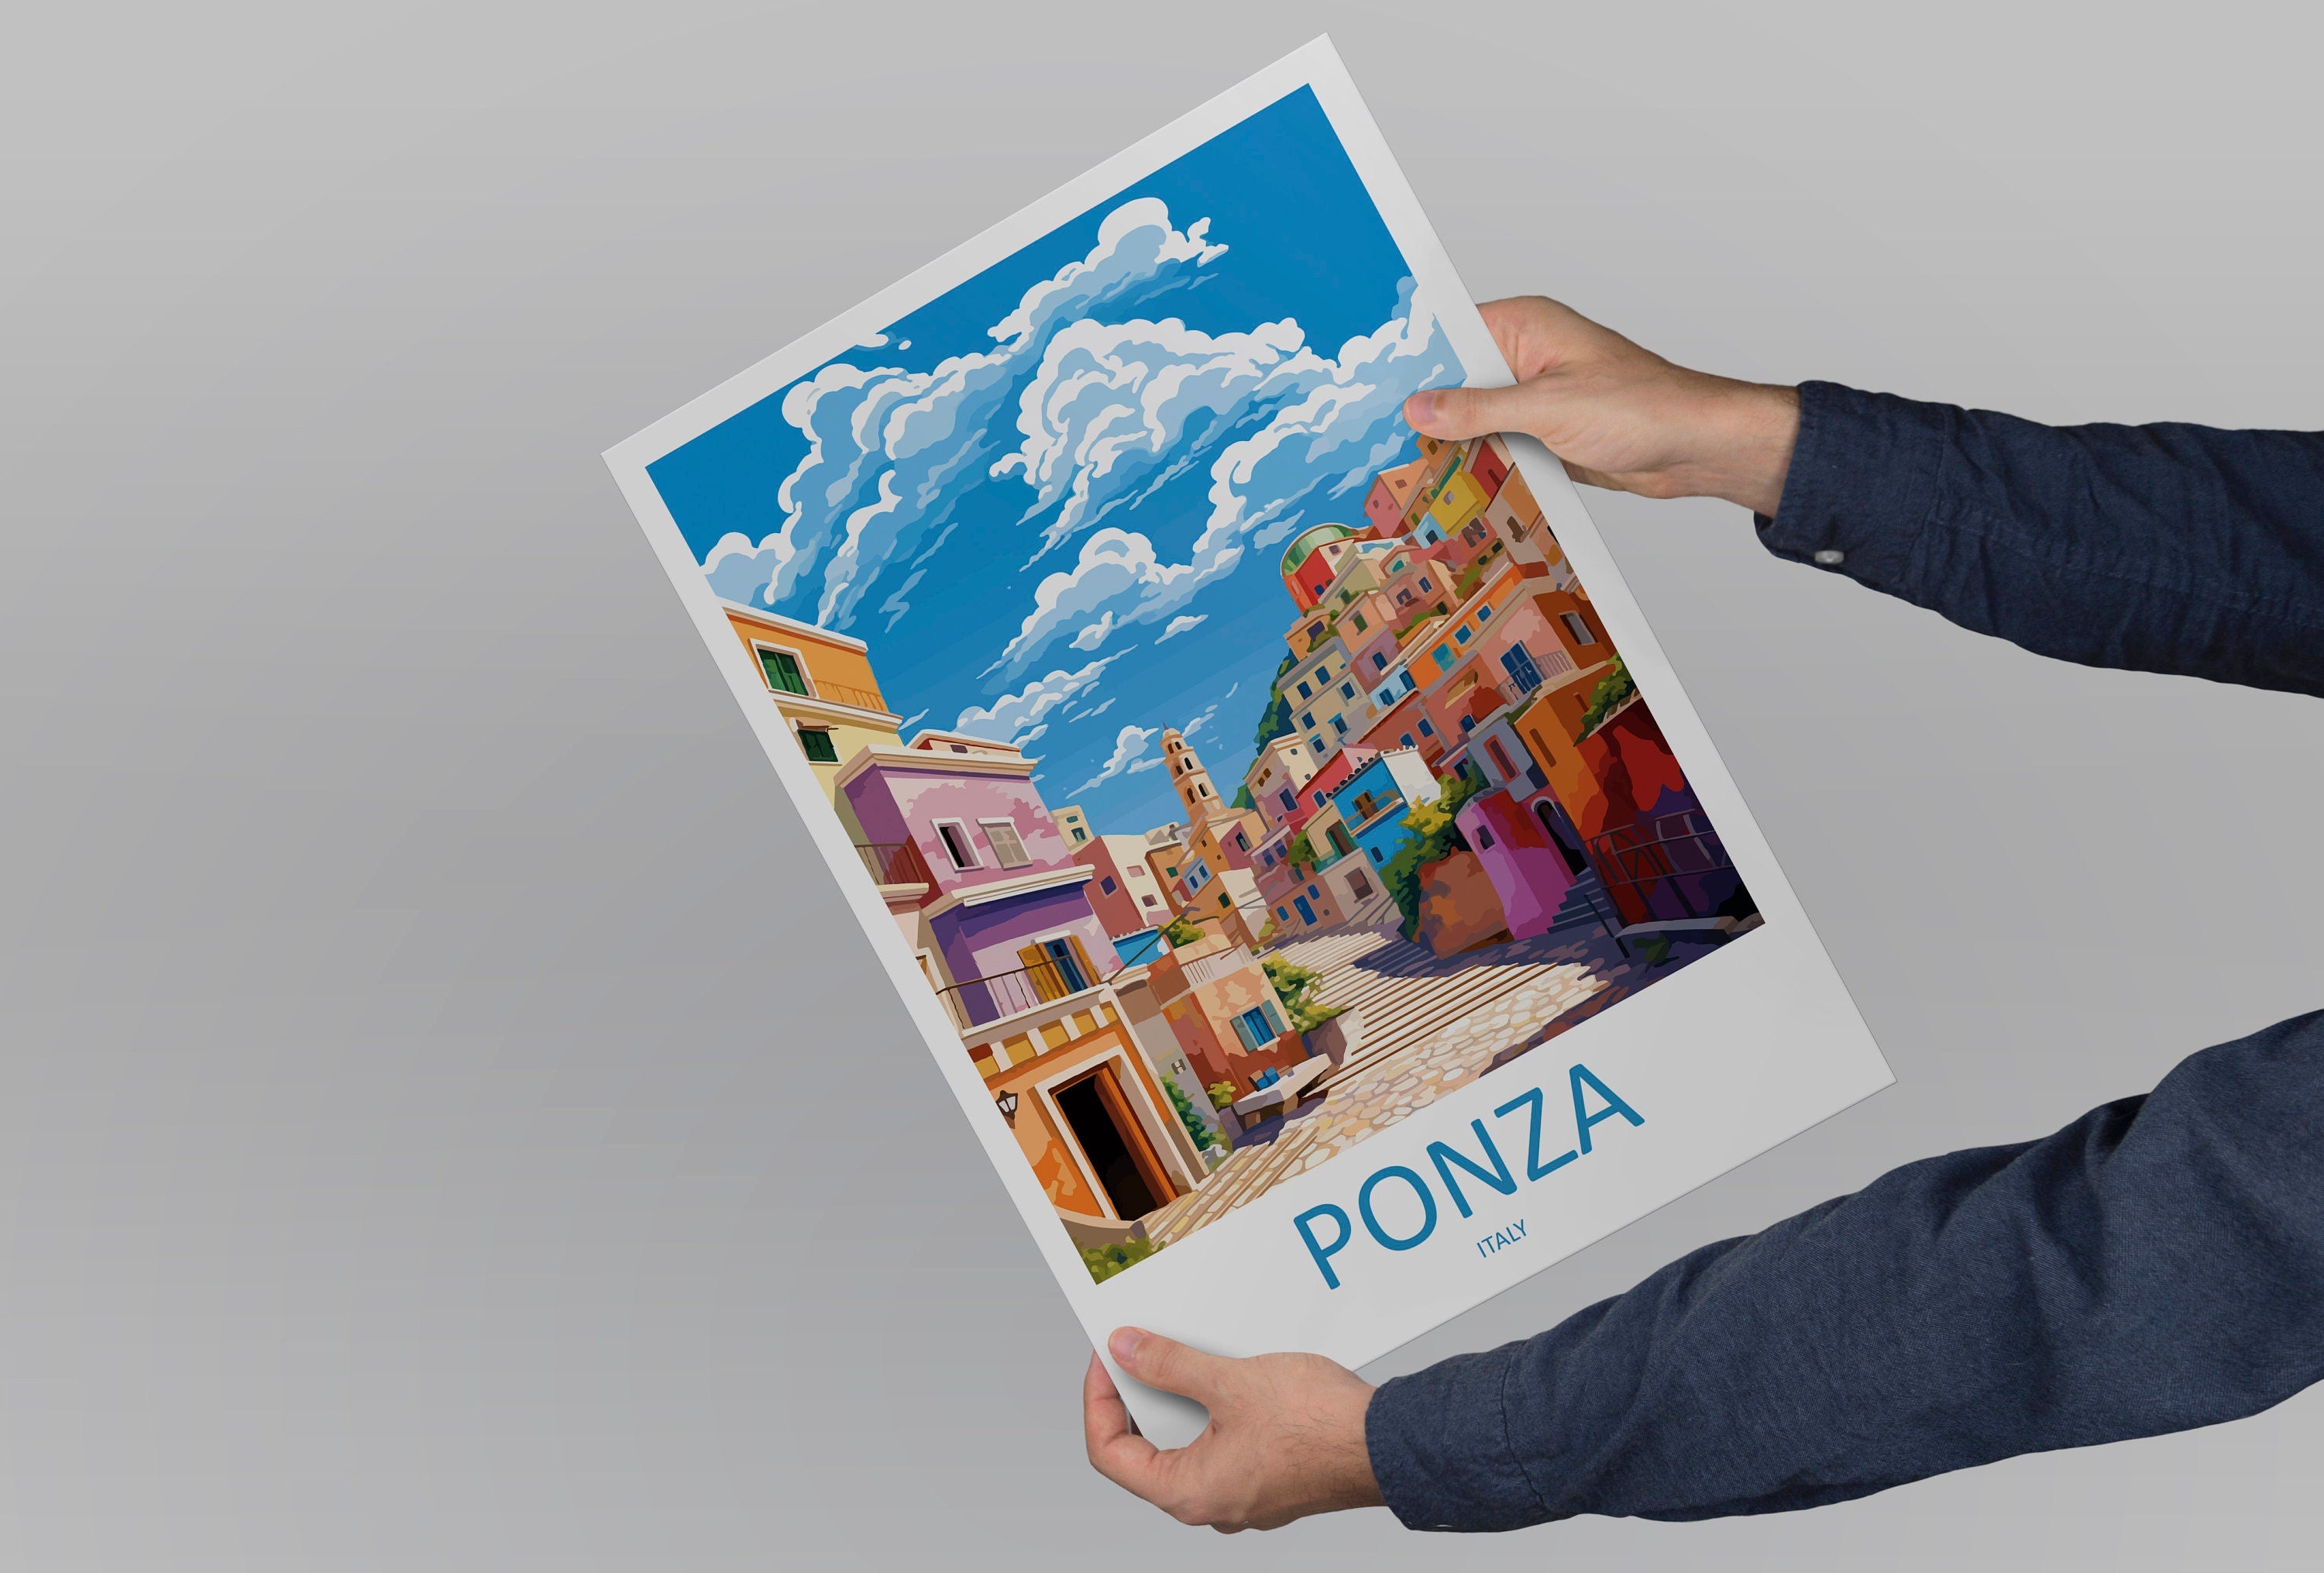 Ponza Travel Print Wall Art Ponza Wall Hanging Home Décor Ponza Gift Art Lovers Italy Art Lover Gift Ponza Print Italy Wall Art Decor